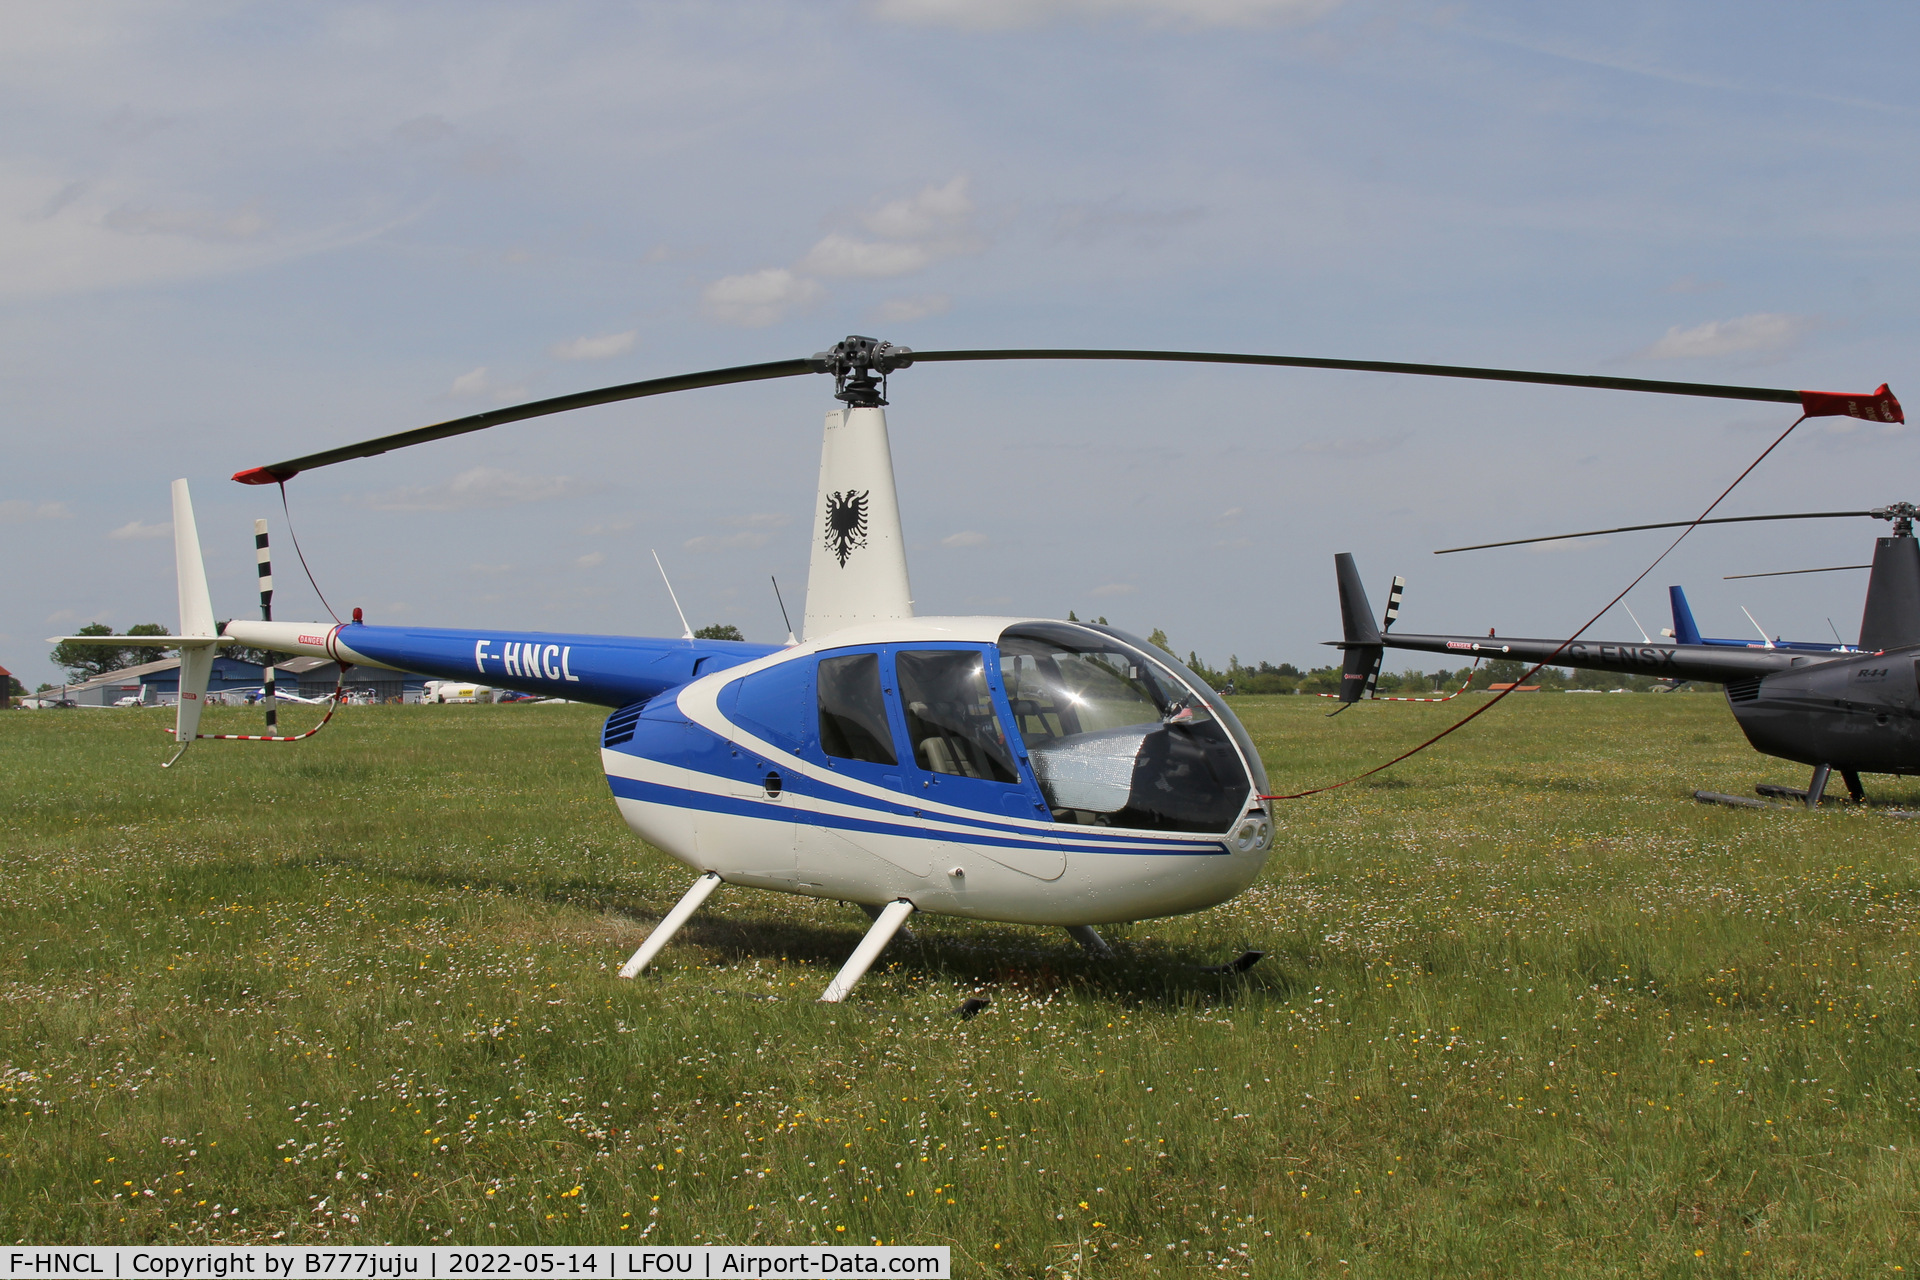 F-HNCL, 2006 Robinson R44 Raven II C/N 11468, at Helico 2022 Cholet